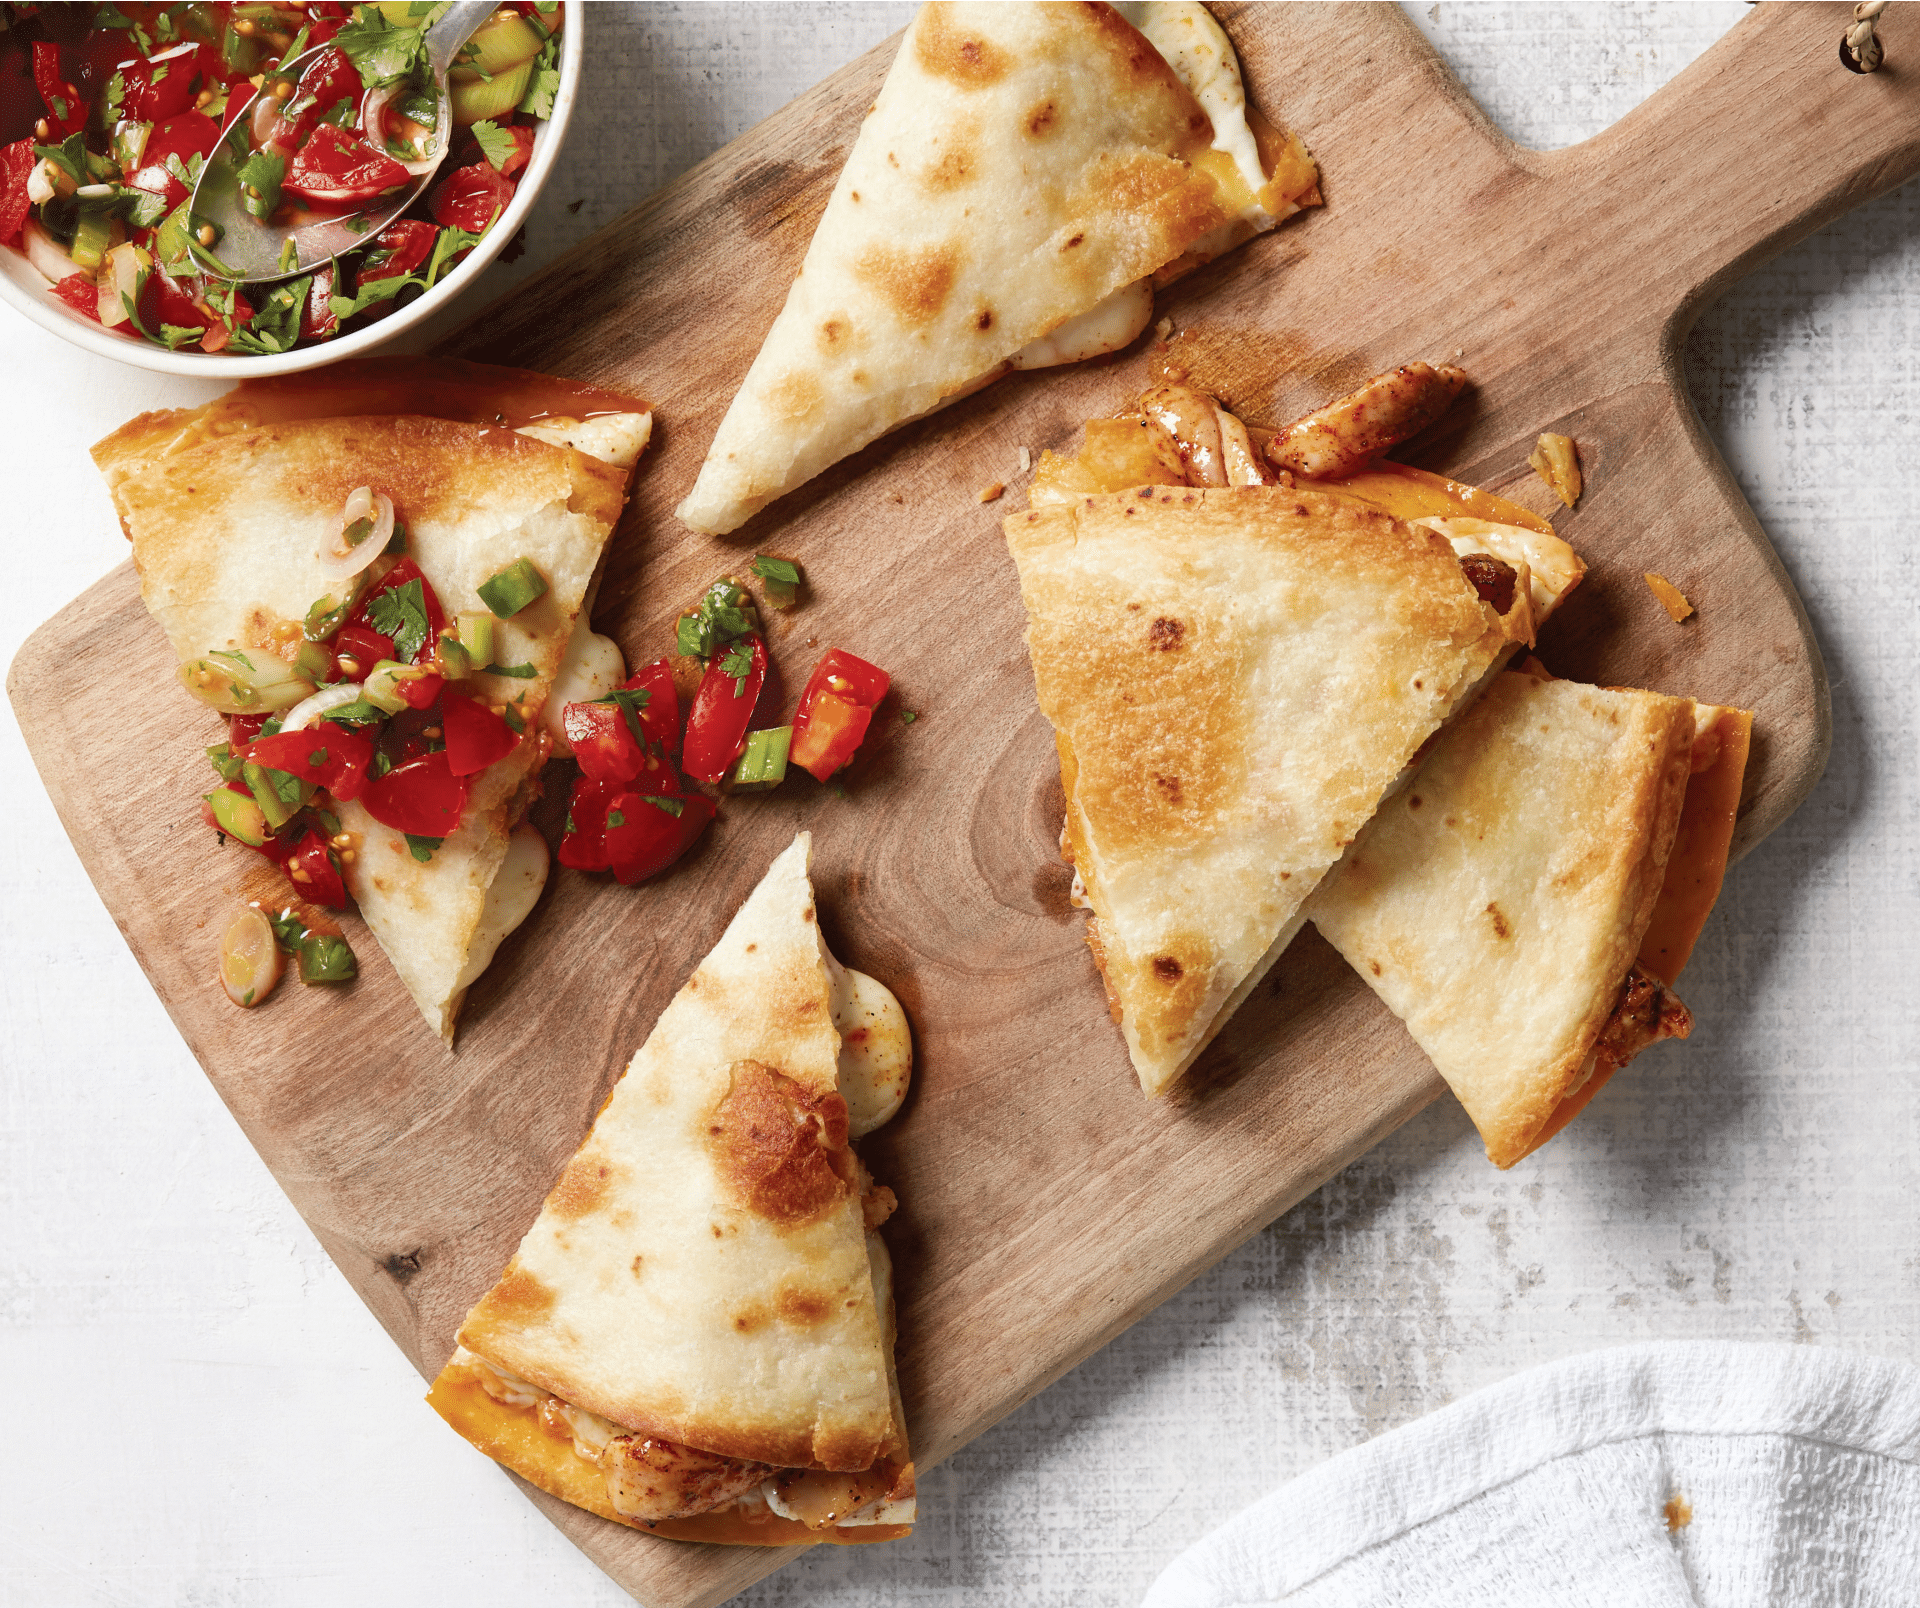 chicken quesadillas on a wooden cutting board with salsa on the side